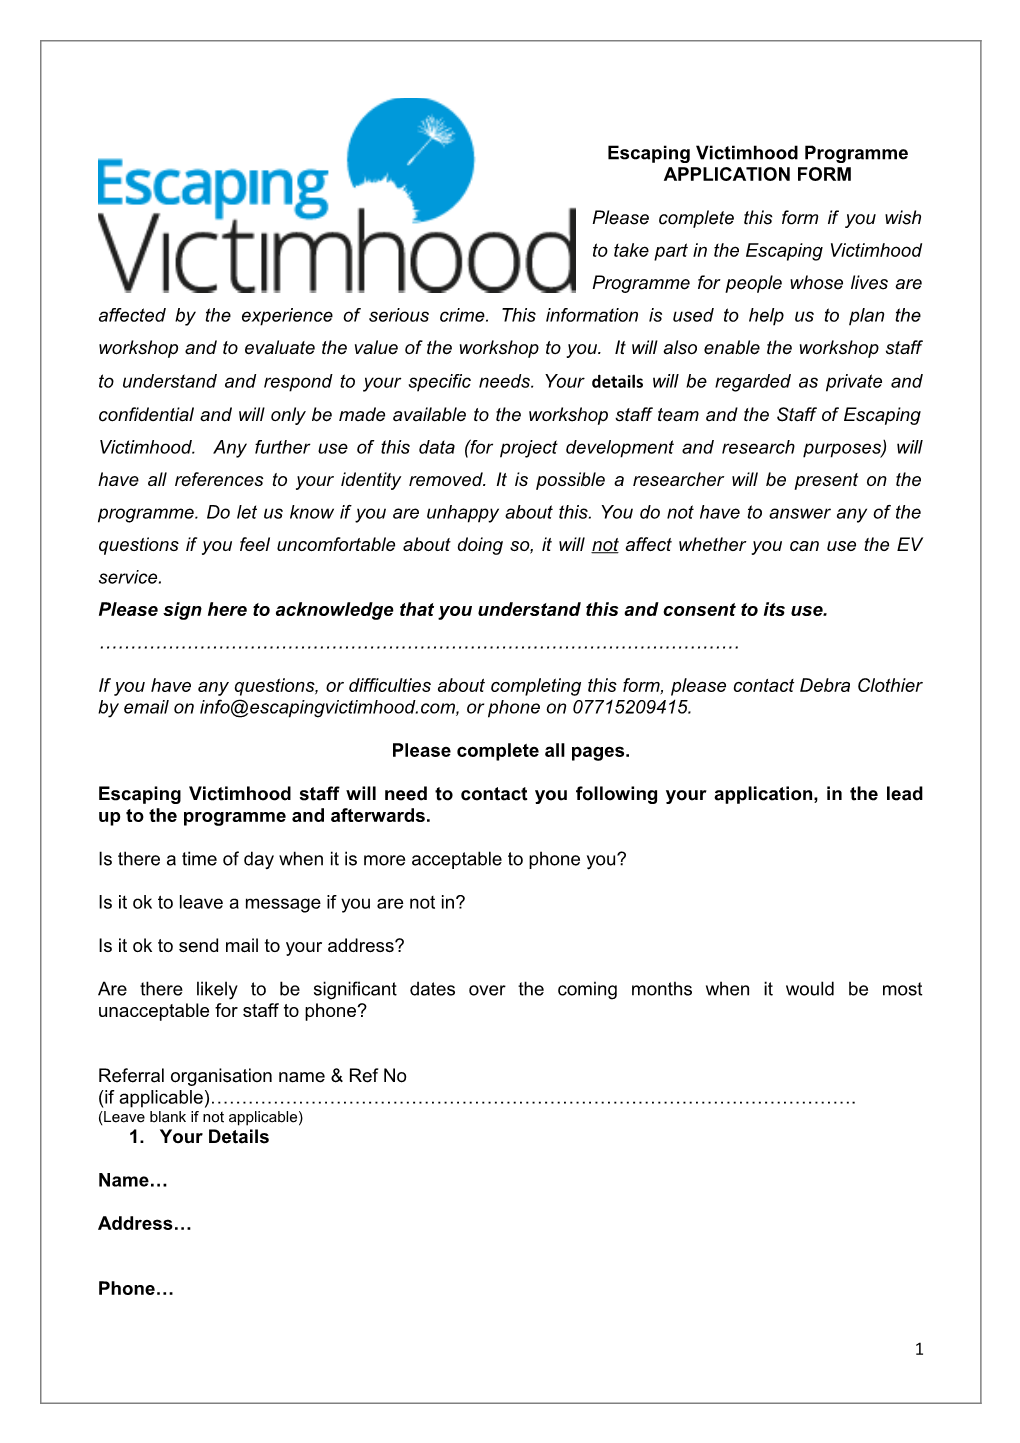 Escaping Victimhood Programme APPLICATION FORM